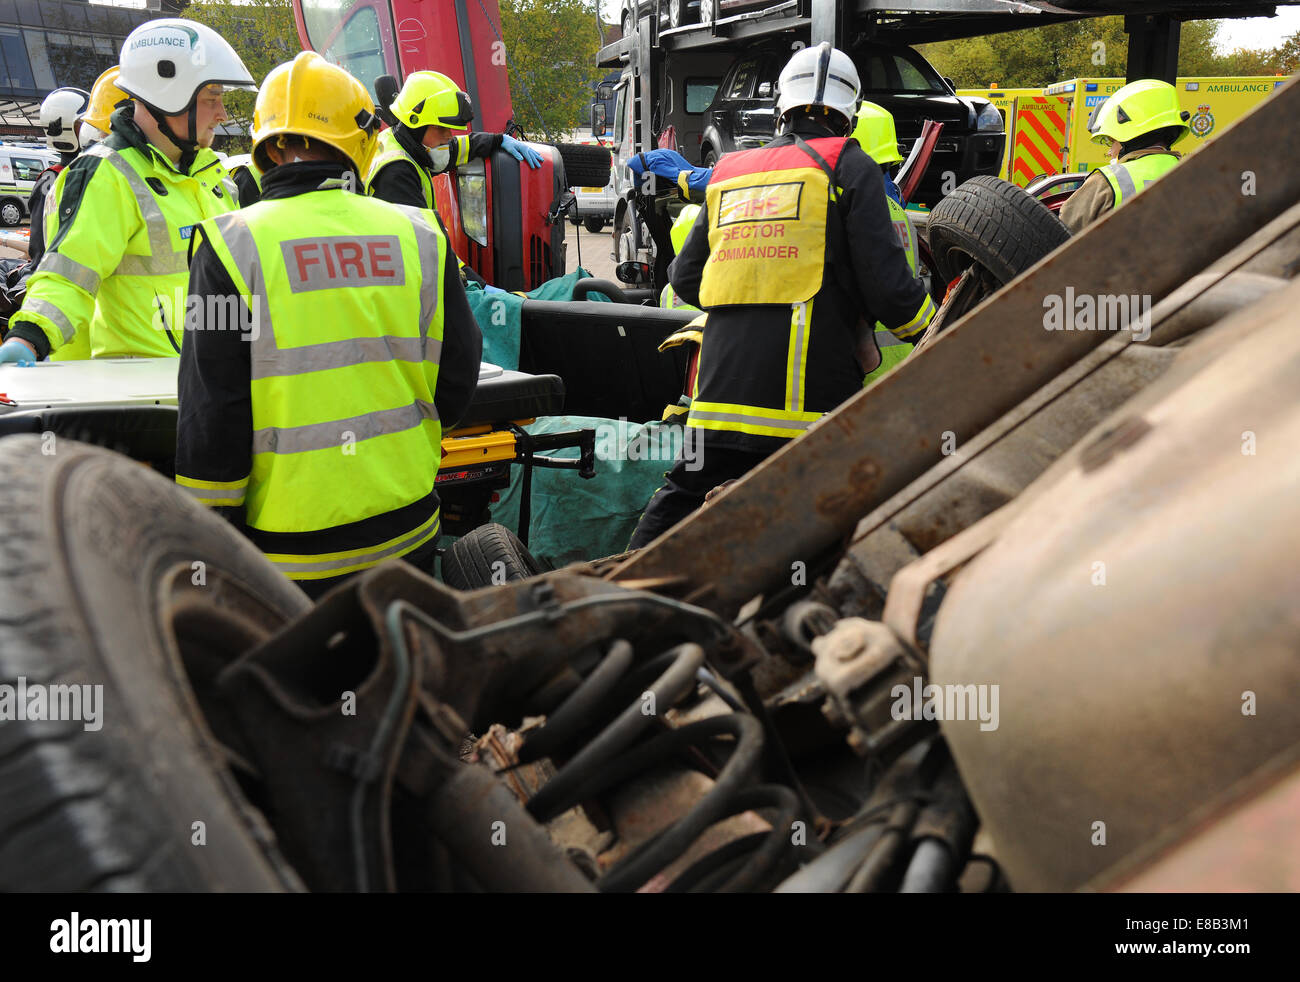 Fire and ambulance crews at major incident exercise Stock Photo